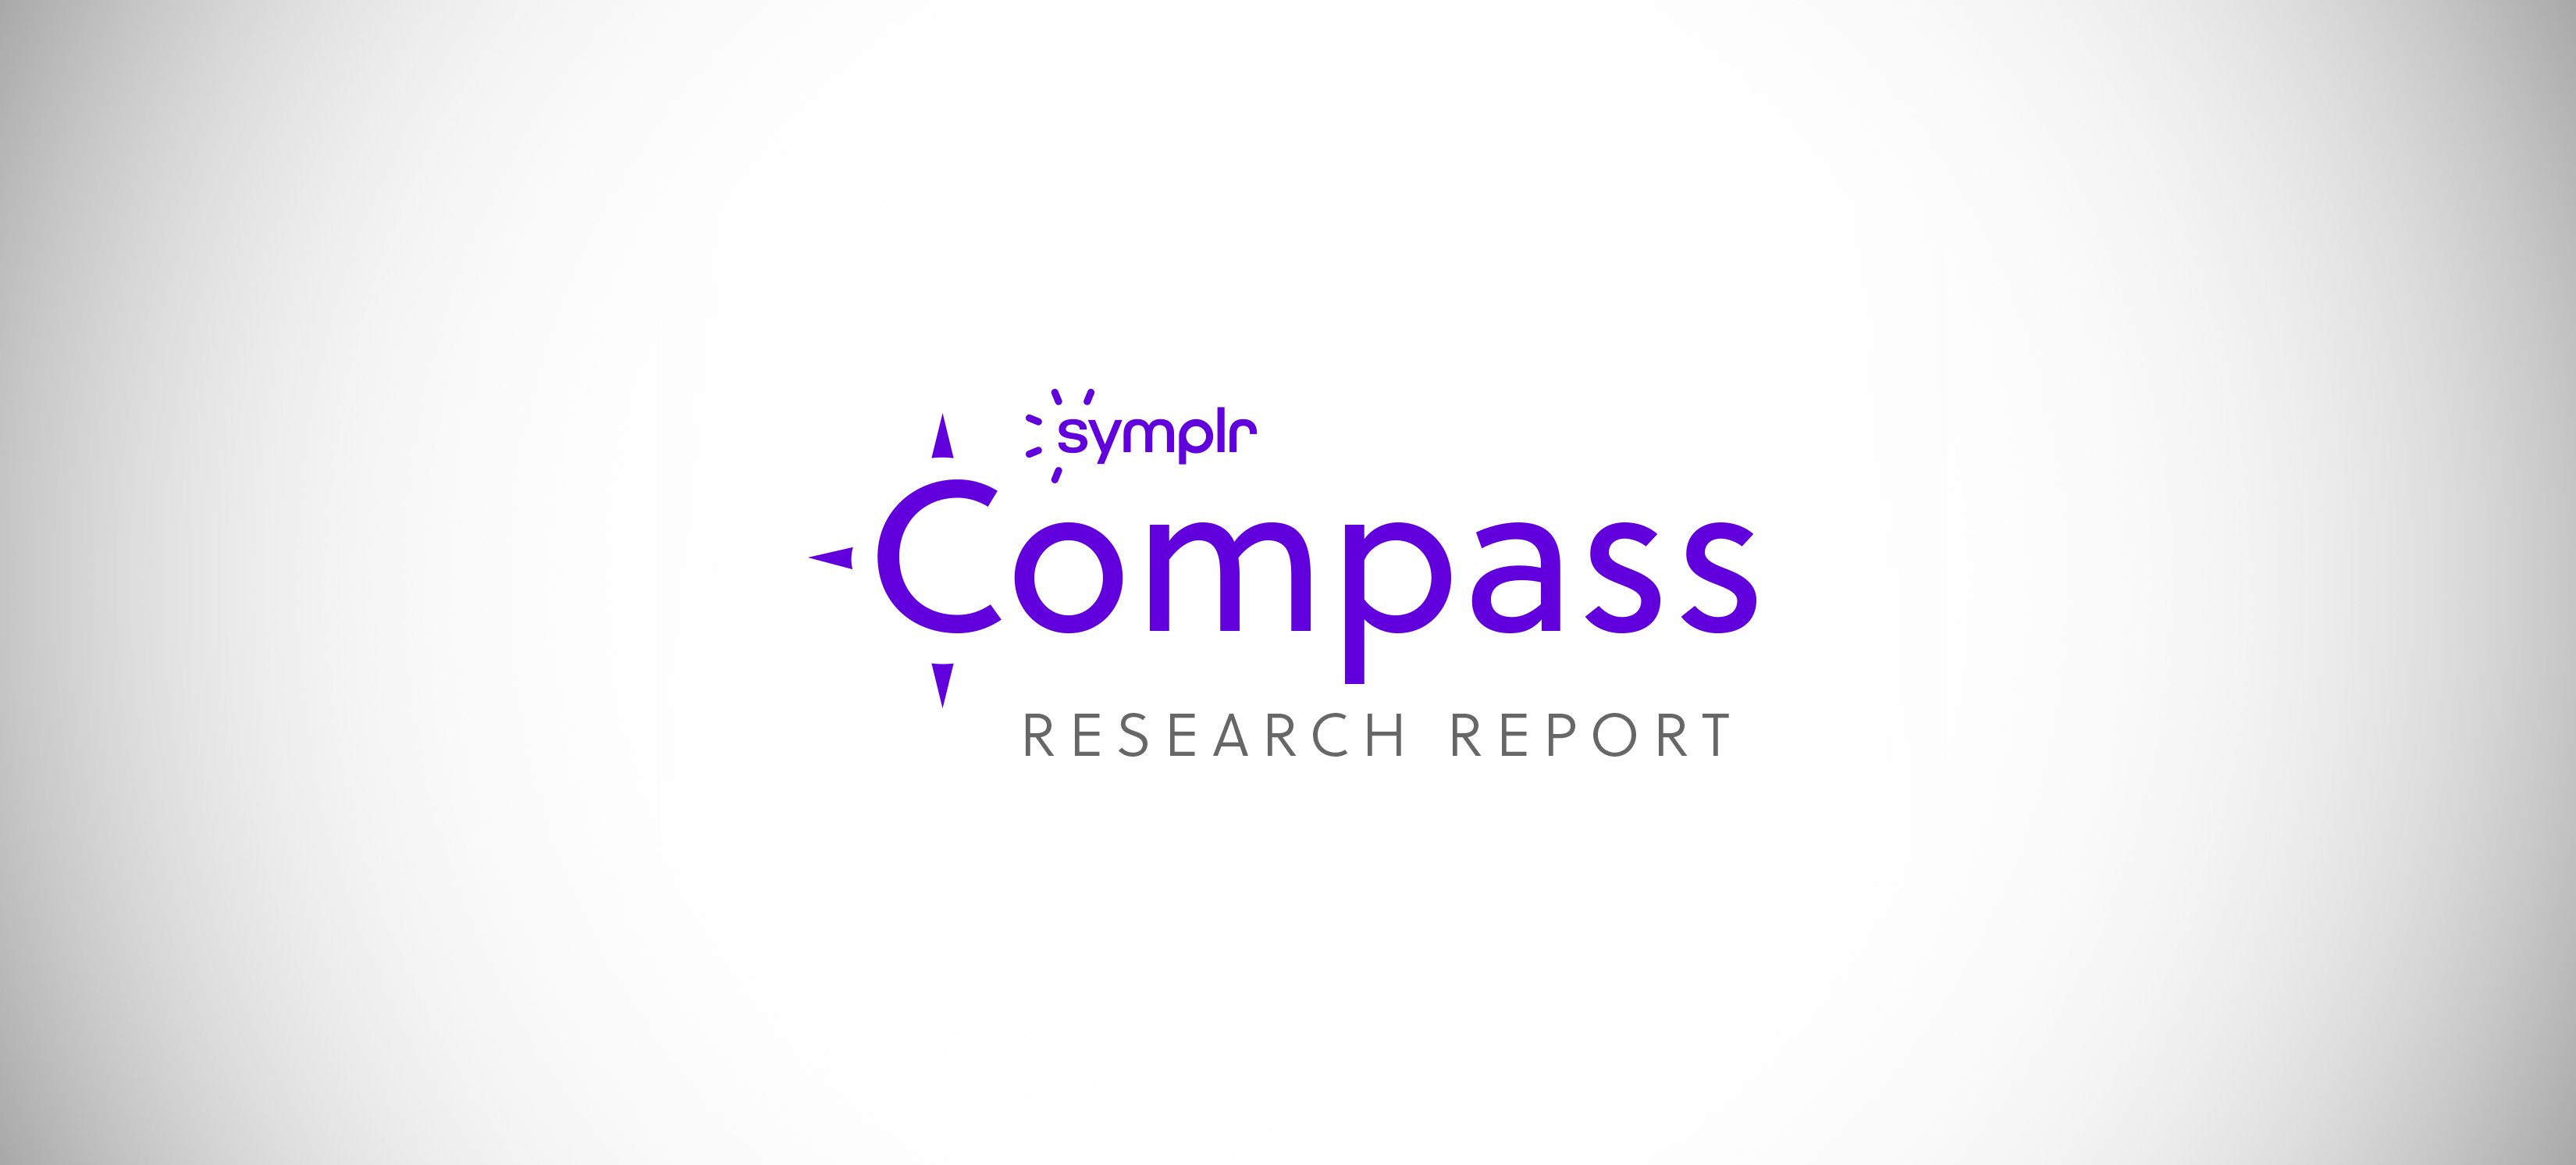 symplr’s 2022 Compass Survey of Health System CIOs Reveals Operational Inefficiencies and Technology-led Opportunities for 2023